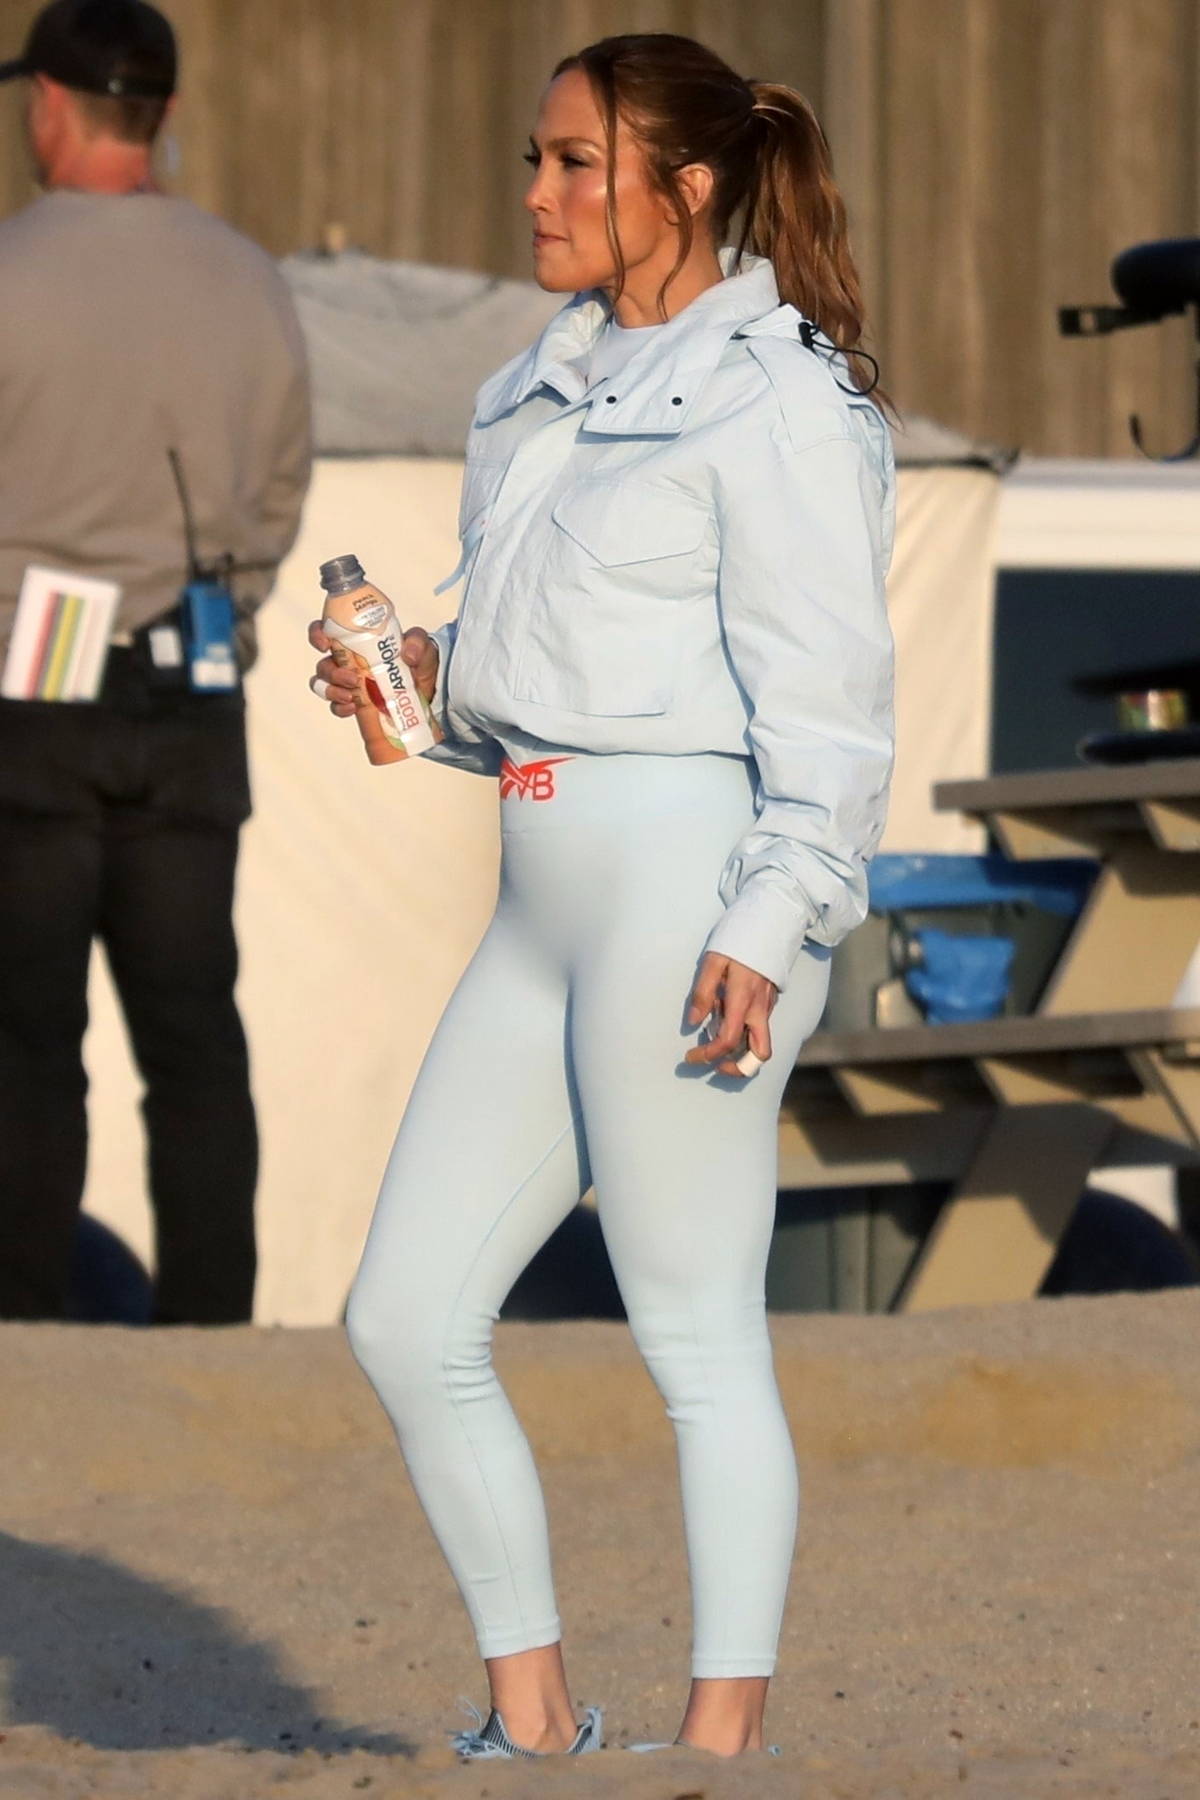 Jennifer Lopez shows off her famous curves in baby blue leggings